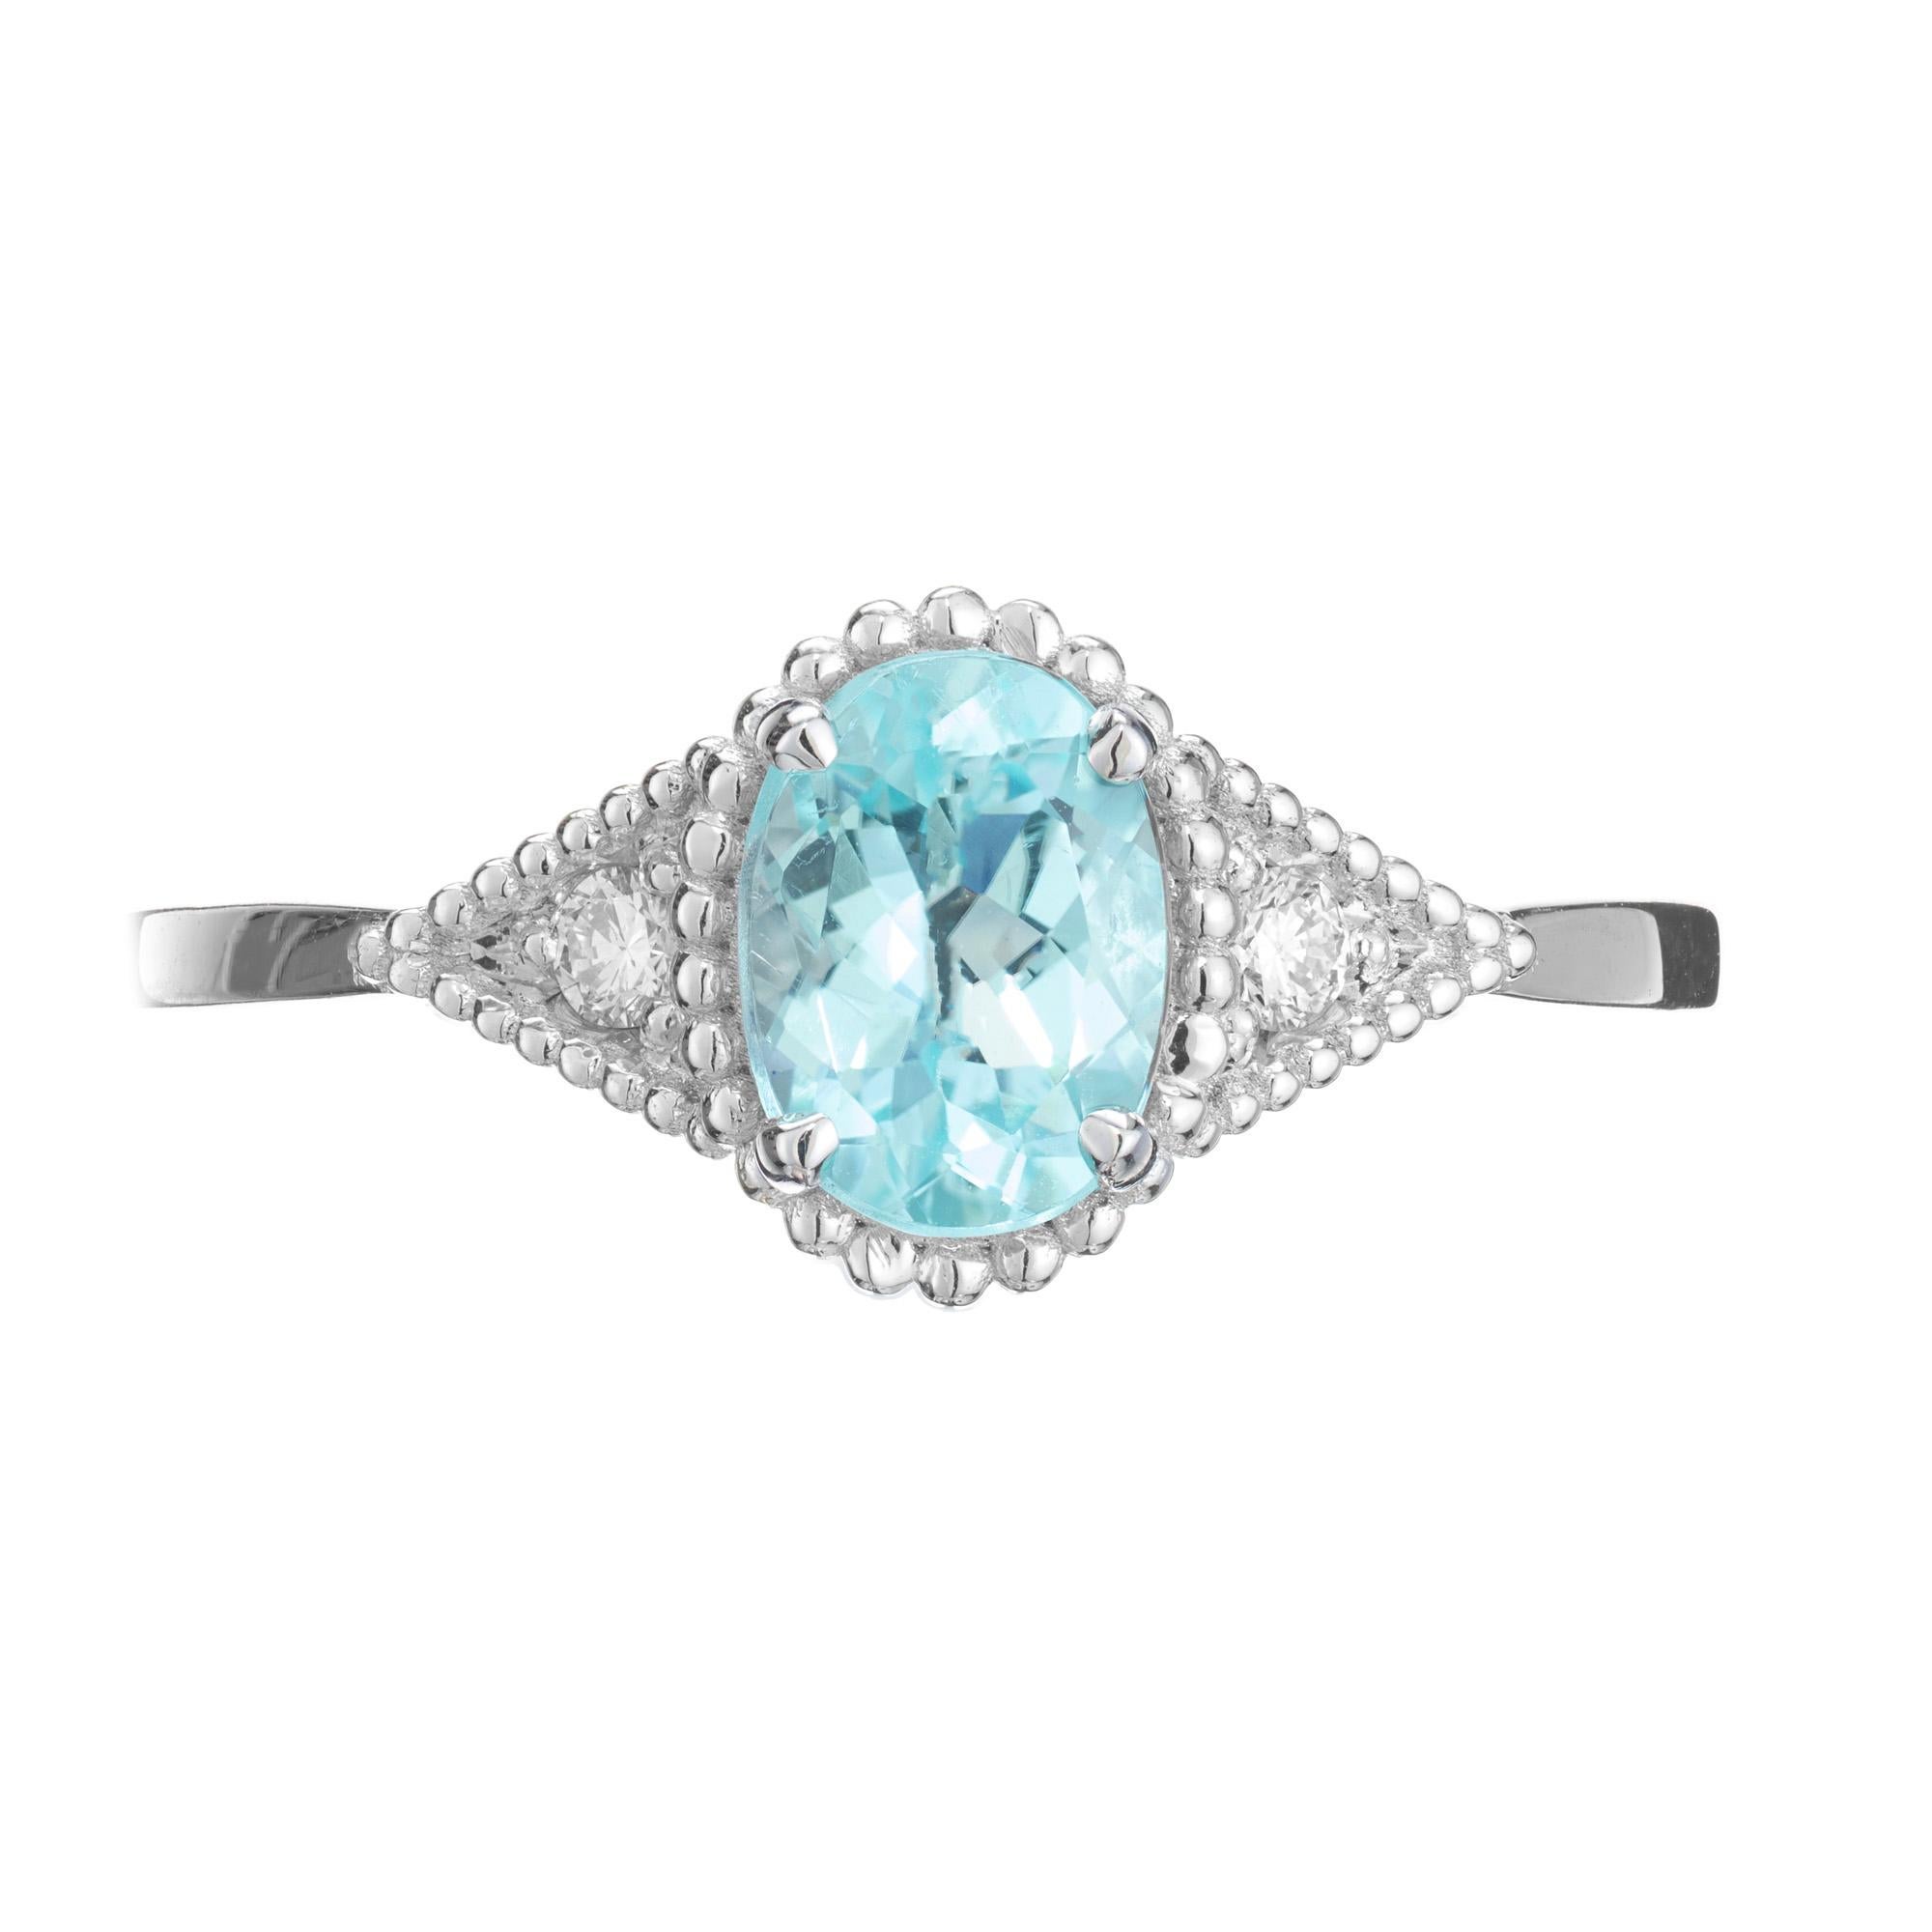 Tourmaline and diamond engagement ring. GIA Certified .71cts neon blue oval tourmaline mounted in a four prong 18k white gold setting with two round cut accent diamonds on each side. Bead halos frame the diamond and tourmaline. GIA has certified